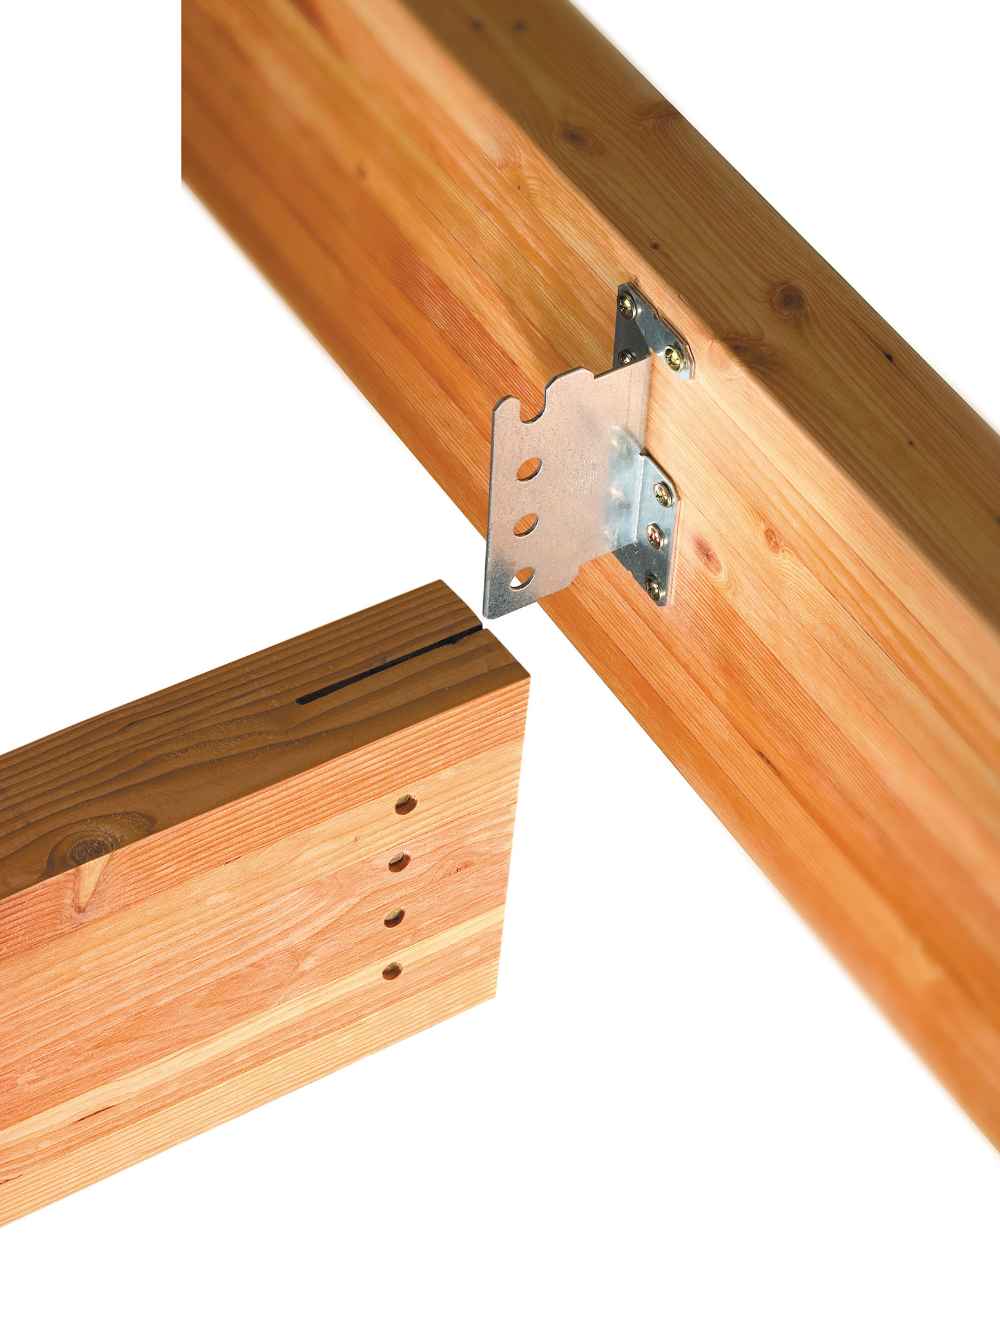 Simpson CJT5ZS Concealed Joist Tie w Short Pins ZMAX Finish image 3 of 5